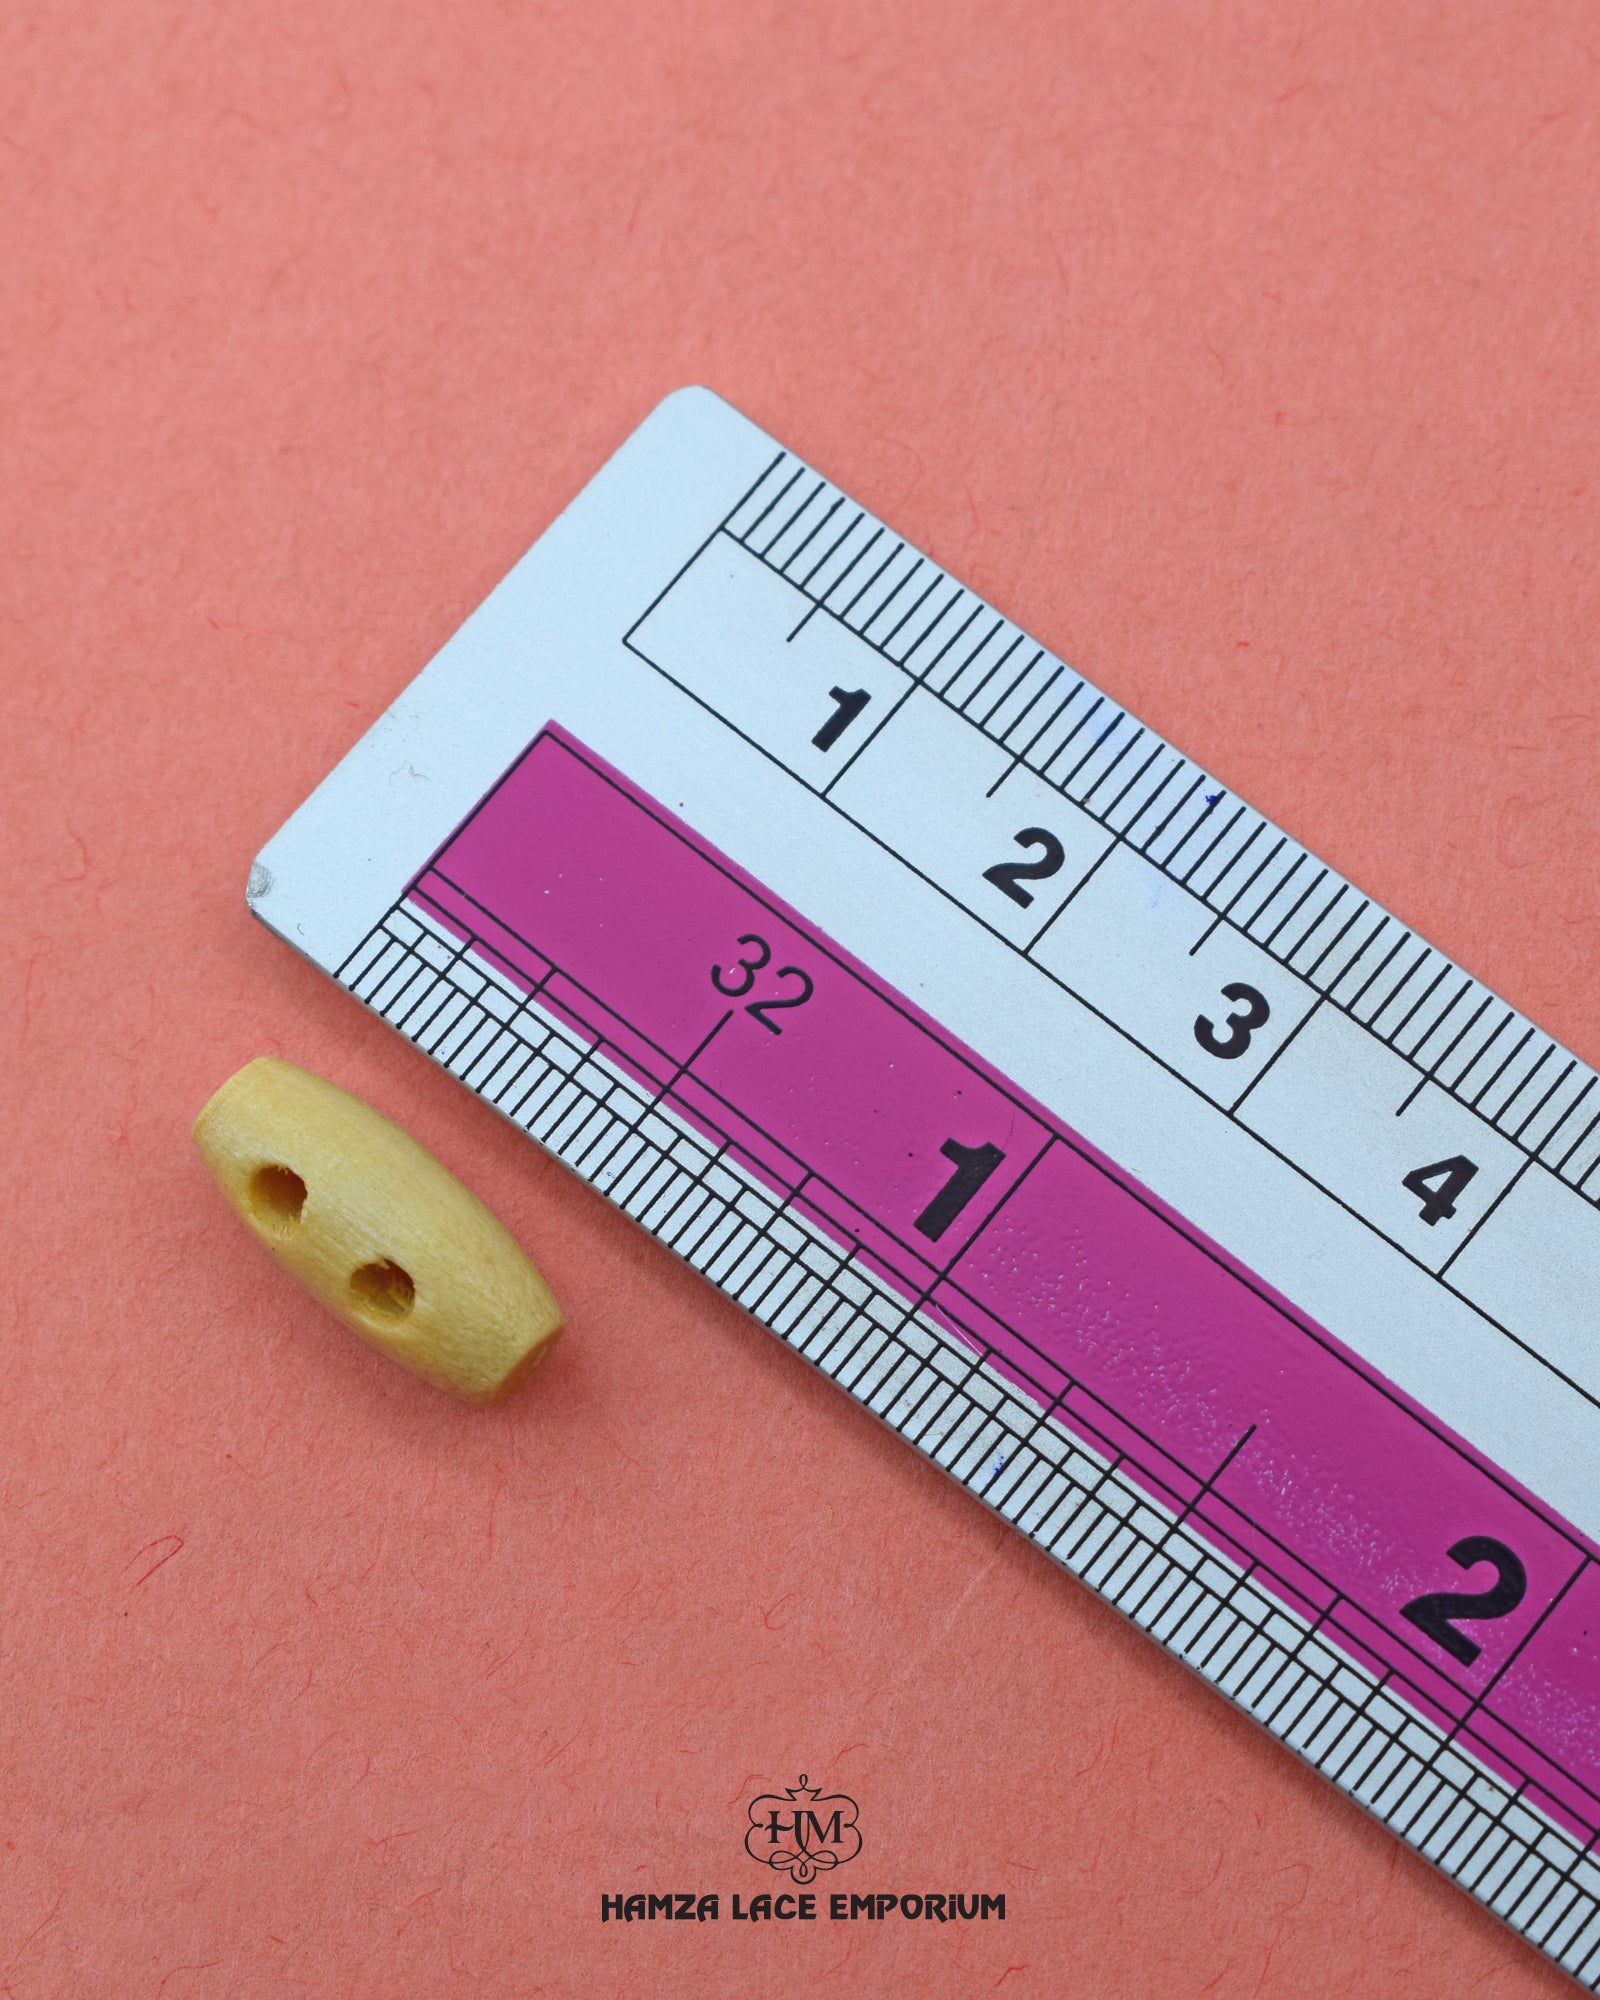 Size of the 'Wood Button WB61' is shown with a ruler